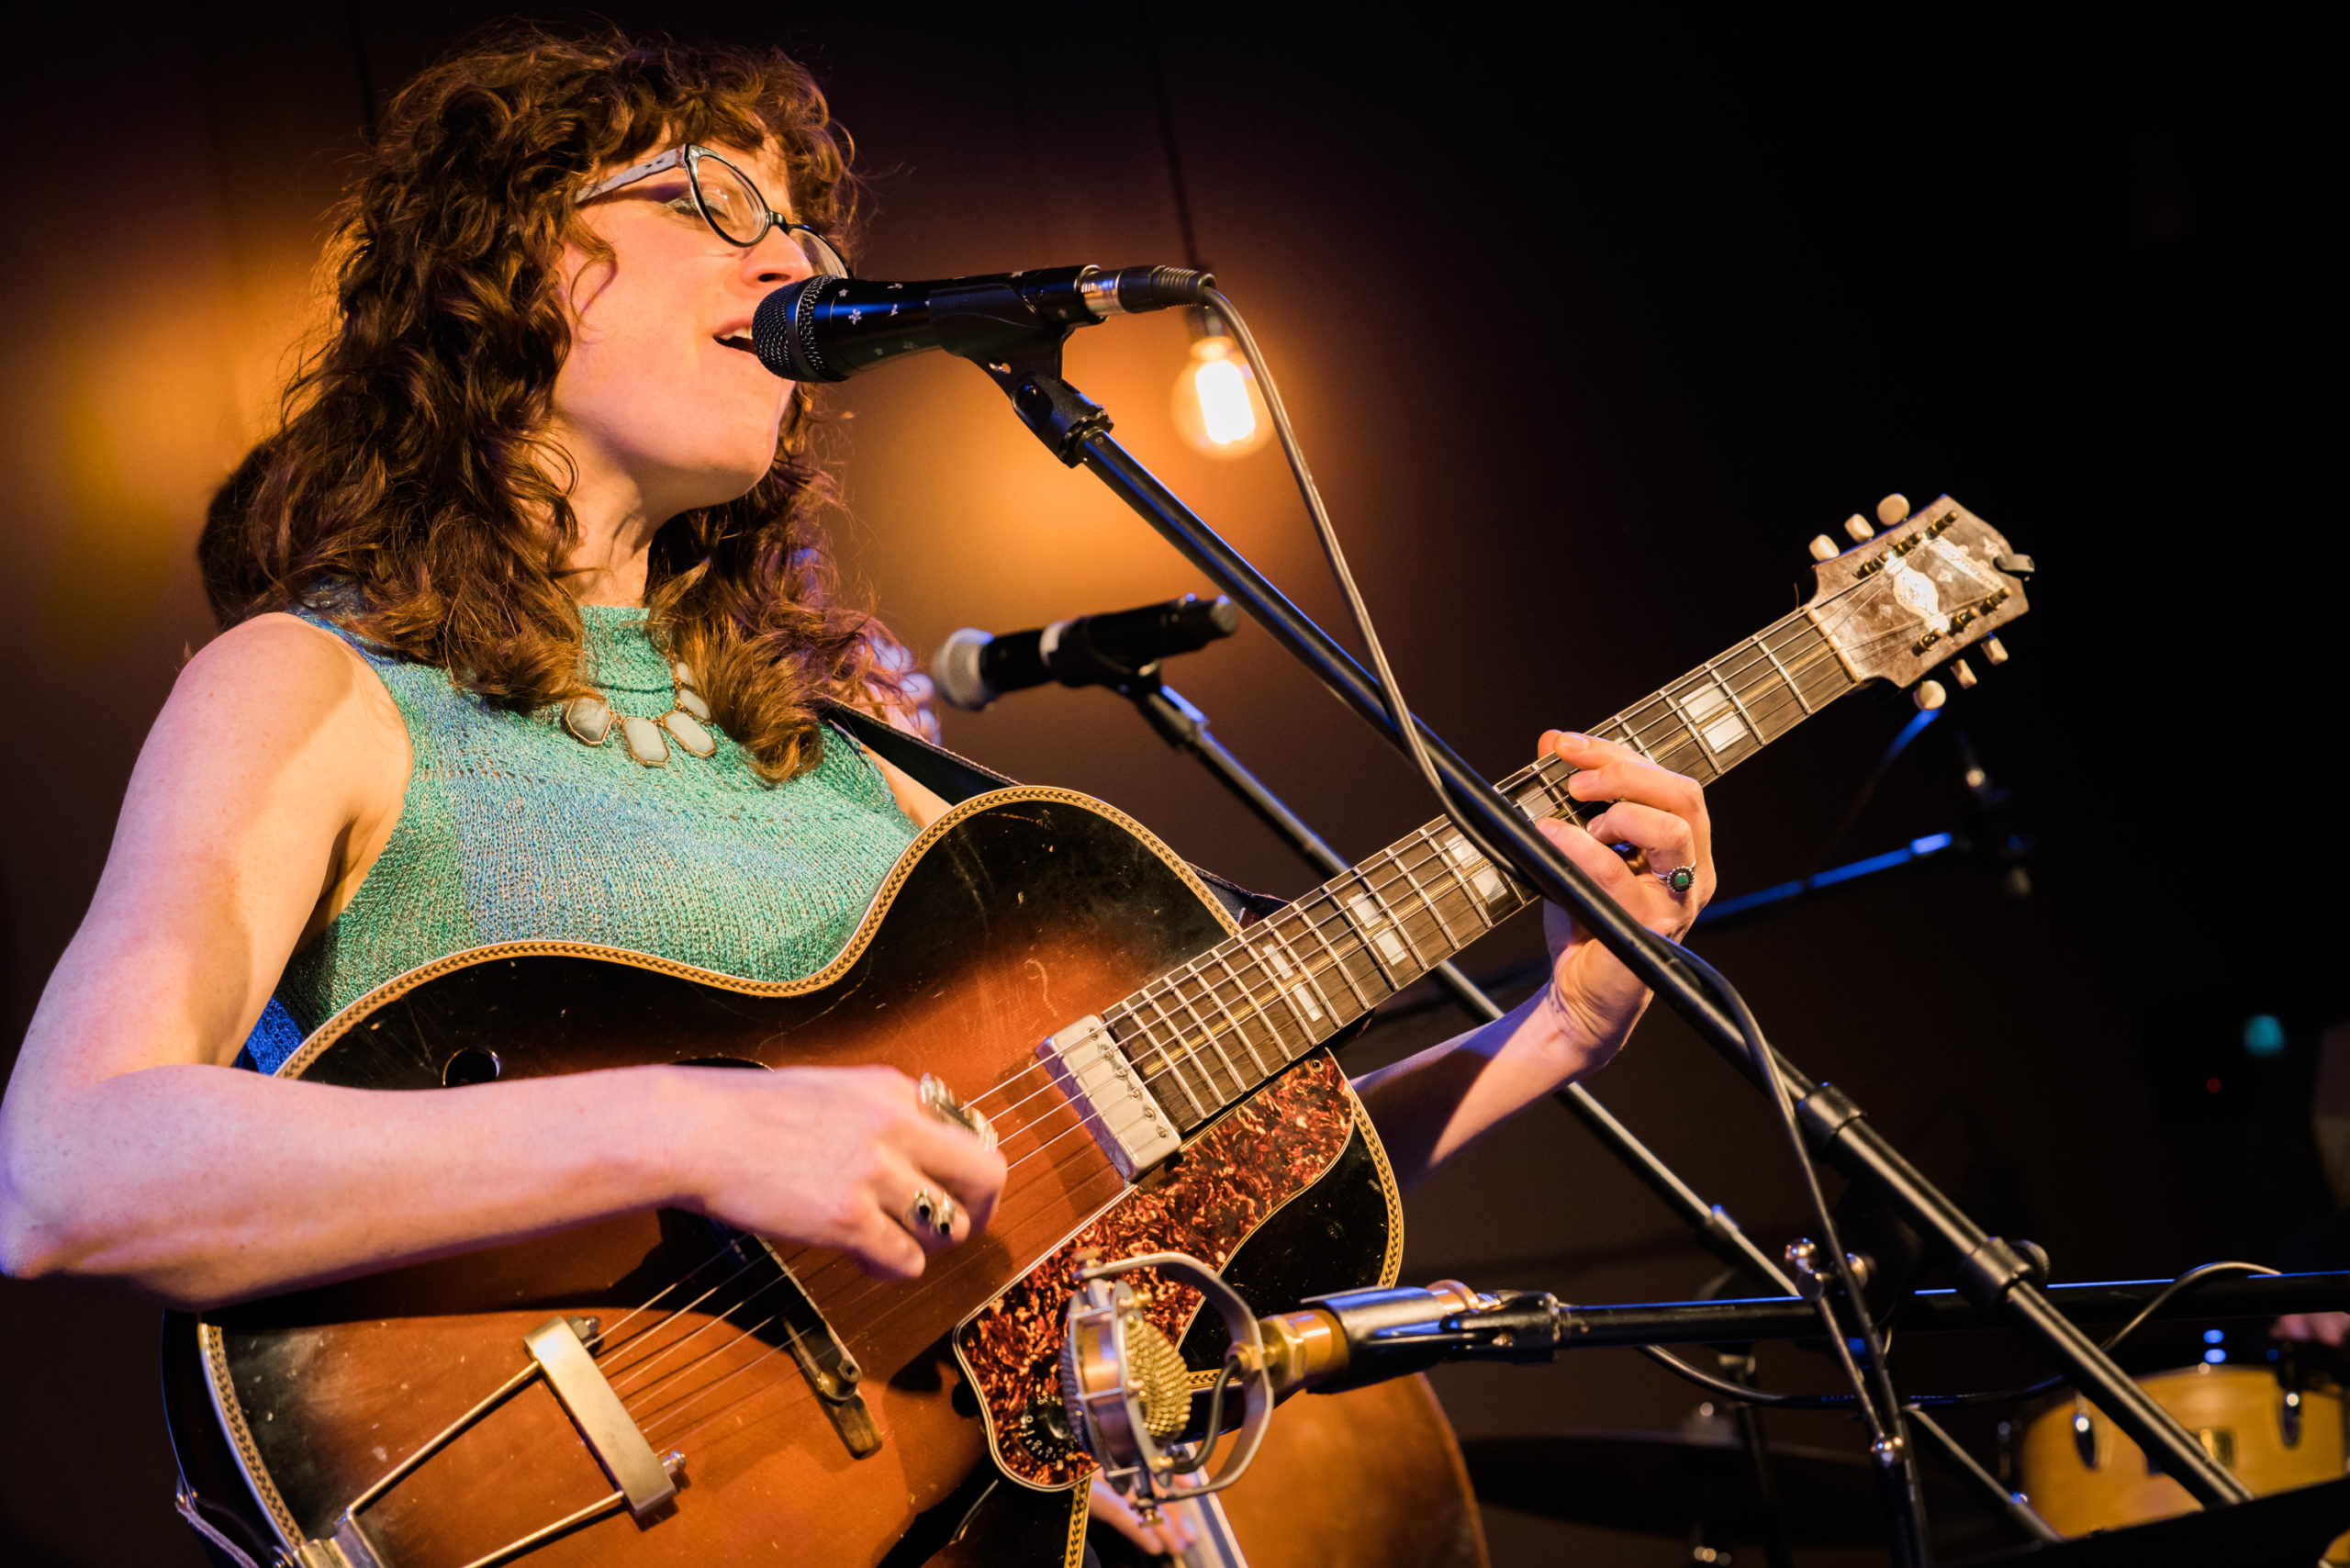 Female guitar player singing at the mic. She has medium-length brown curly hair, glasses, and is wearing a sea green sleeveless top and a white costume jewelry necklace.